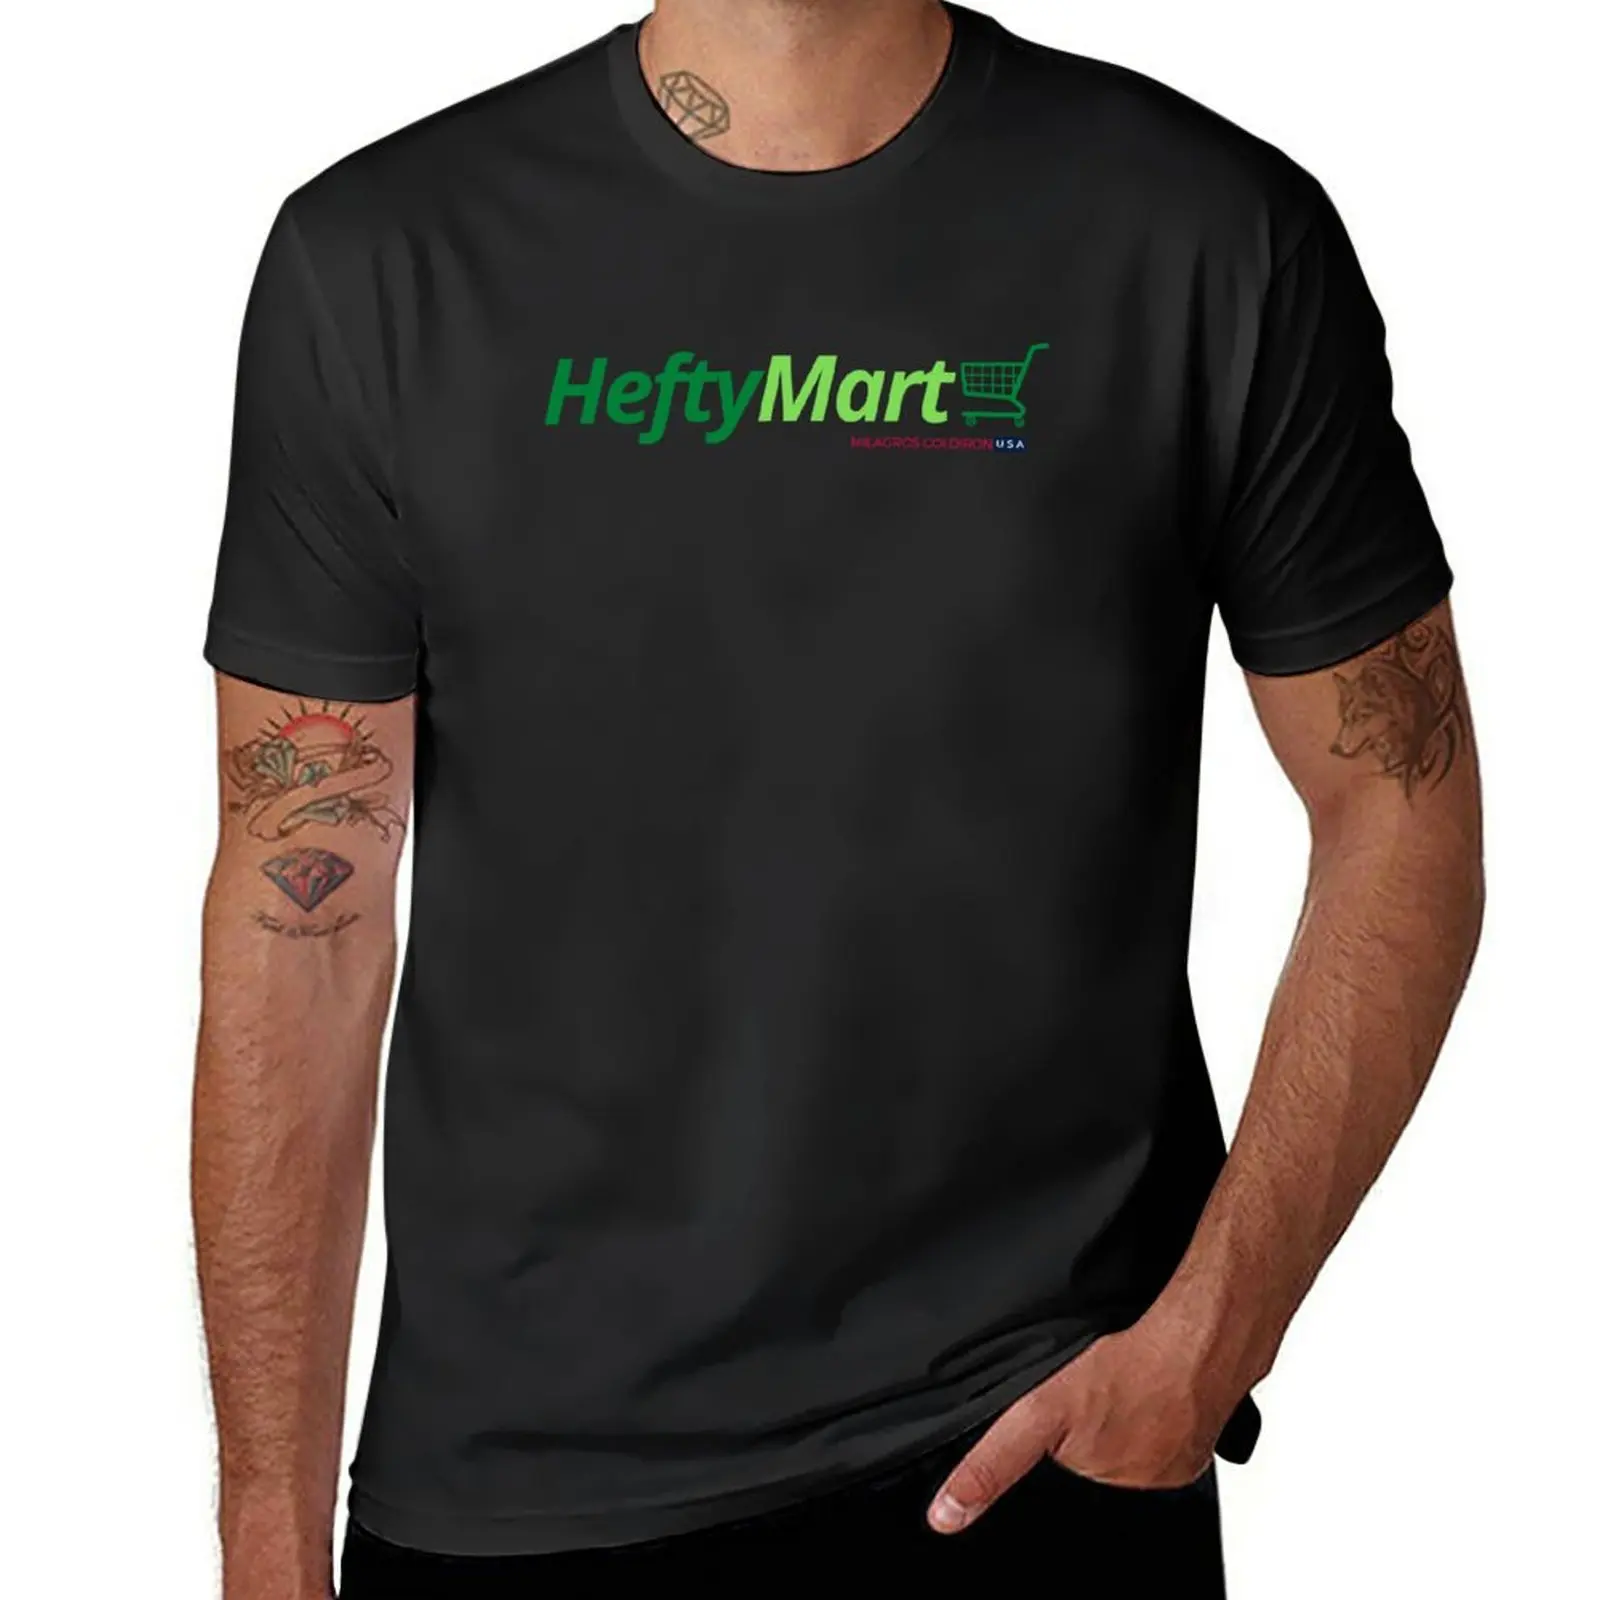 

New Hefty Mart (William Gibsont-shirt The Peripheral) T-Shirt funny t shirt anime Short sleeve men clothing